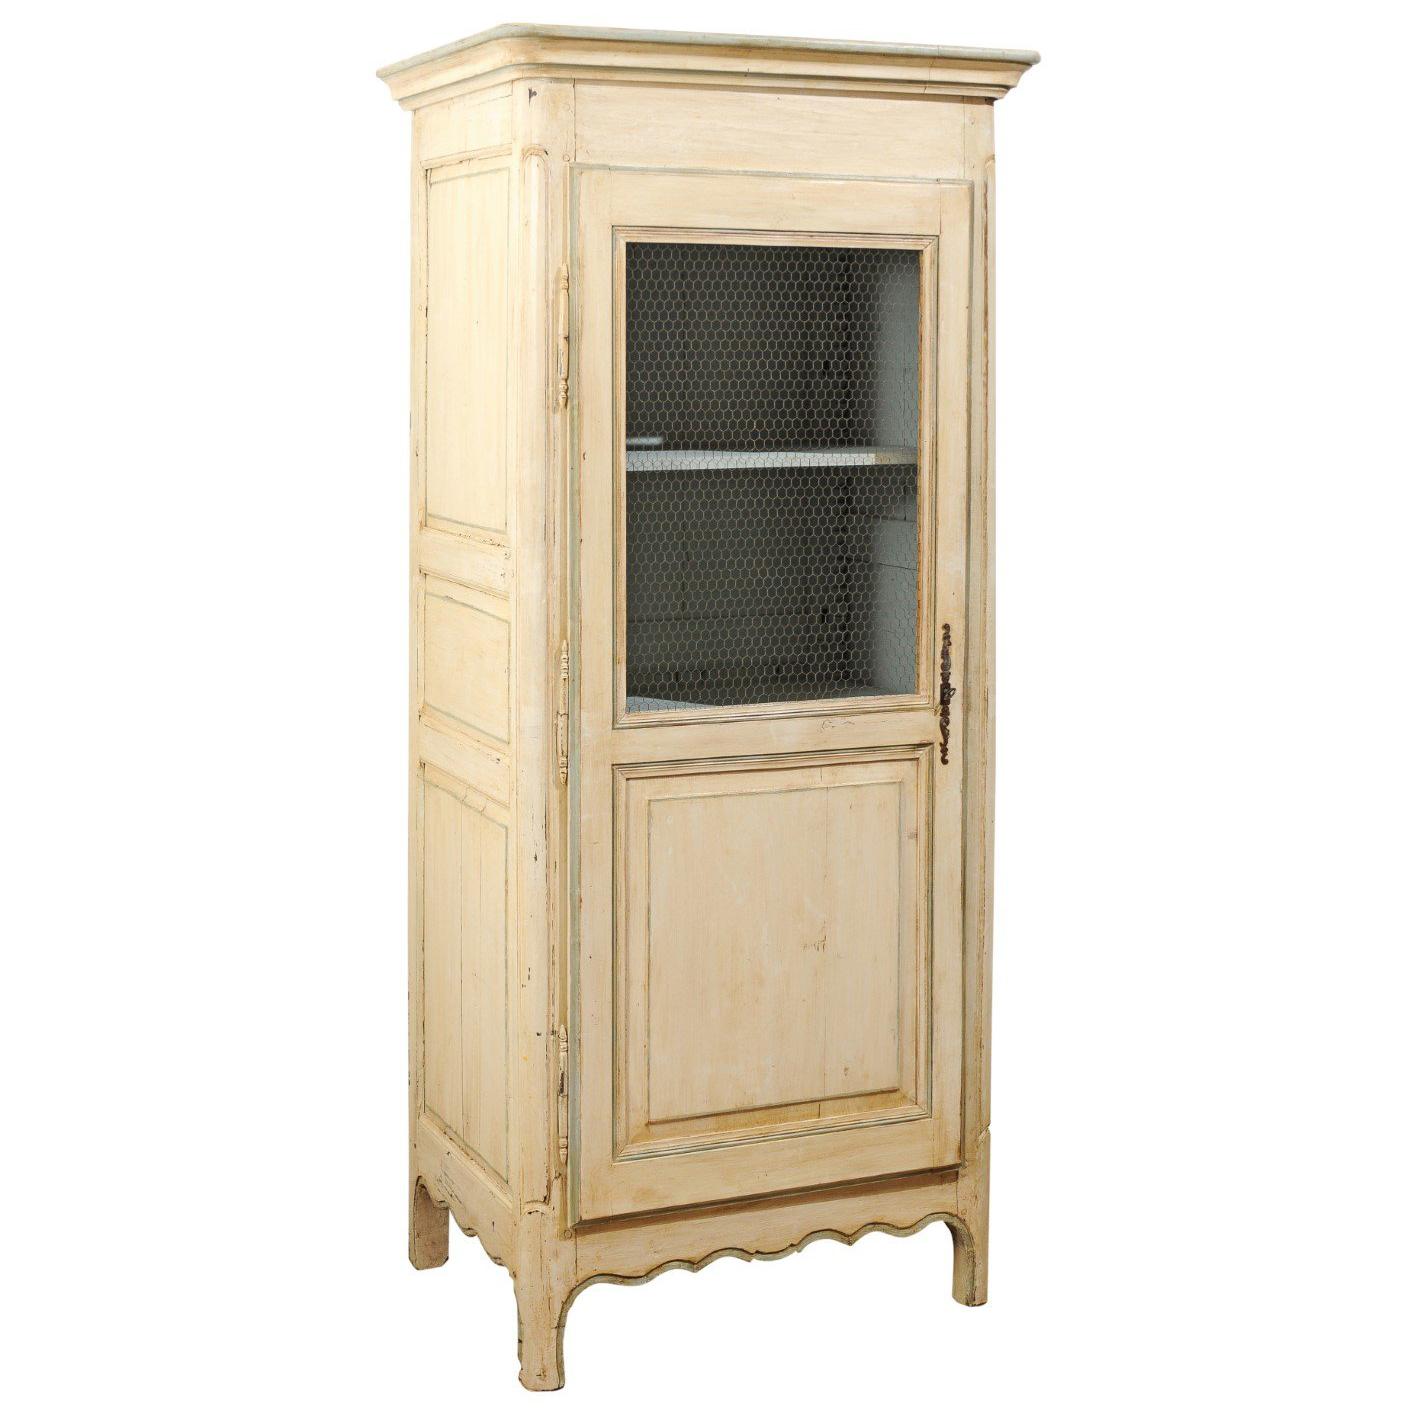 French 19th Century Painted Wood Bonnetière Cupboard with Chicken Wire Door